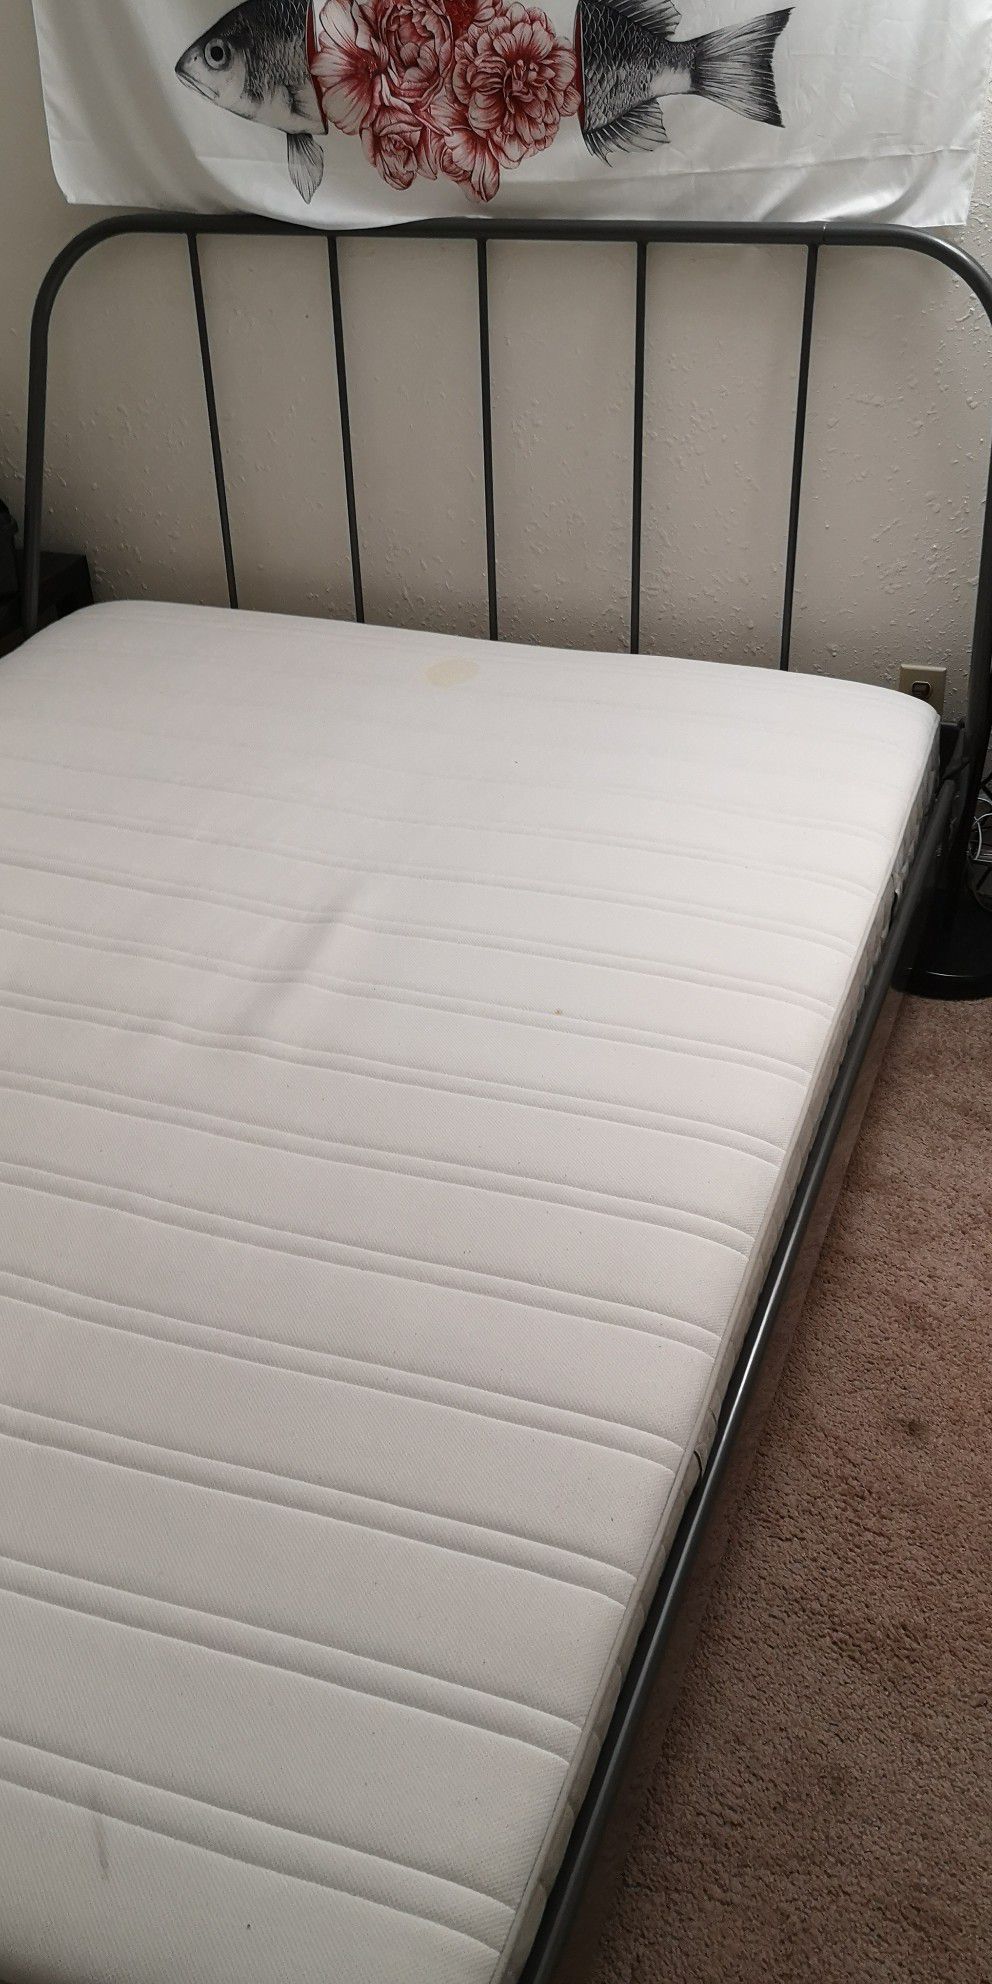 IKEA Queen size bed and mattress